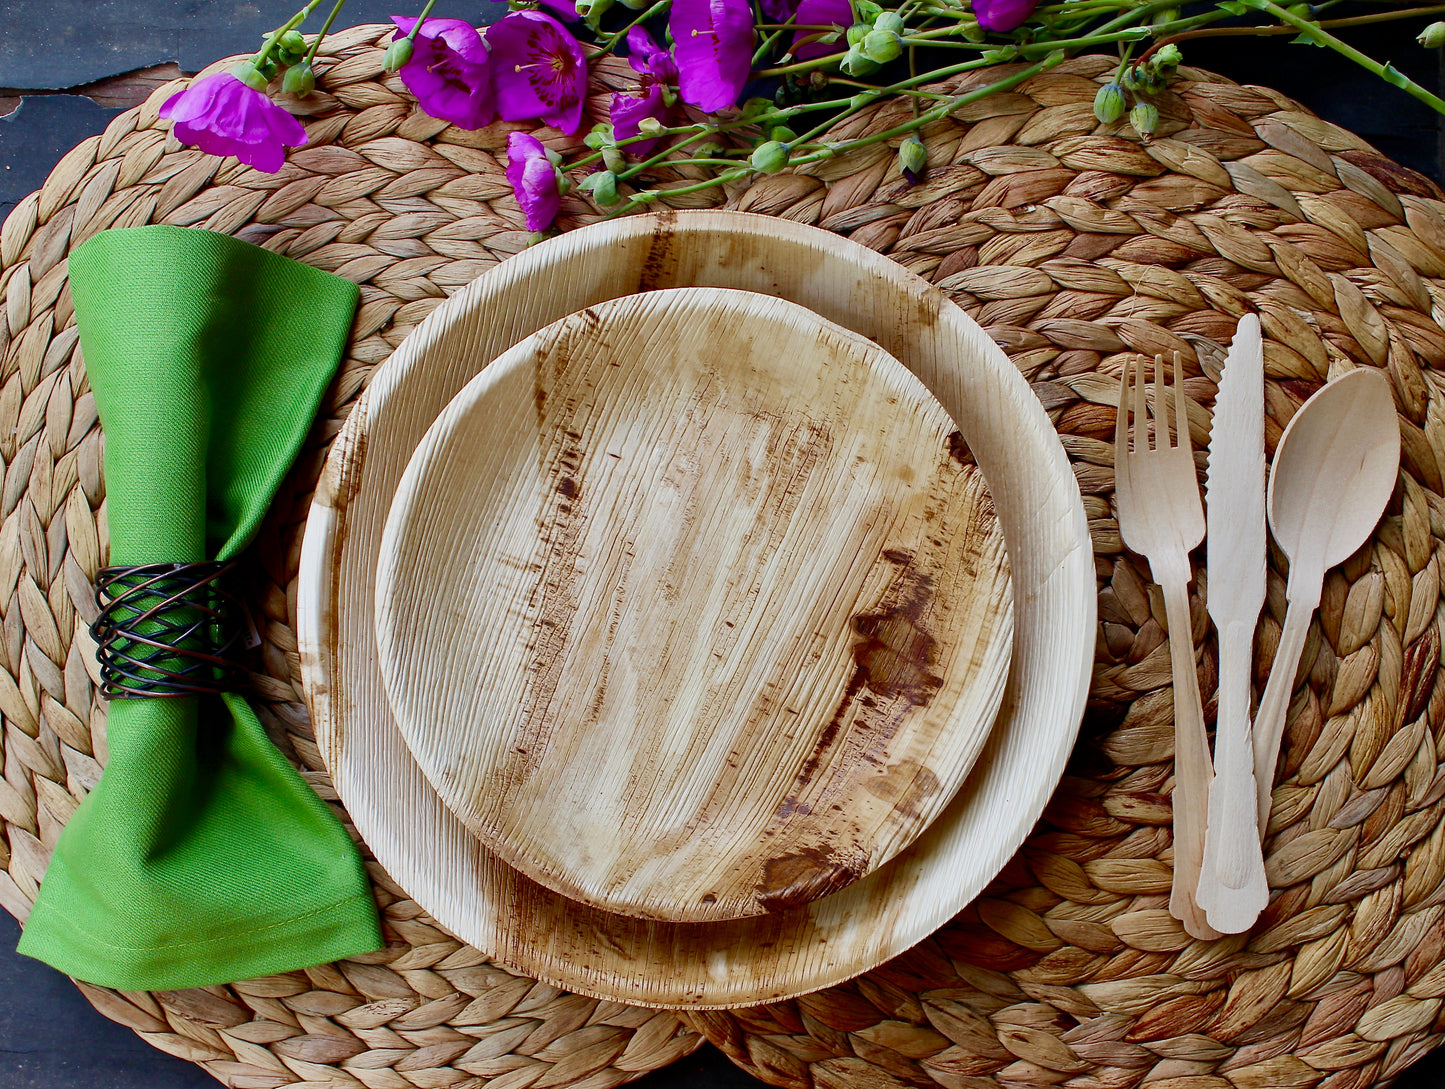 Bamboo Type Palm Leaf 25 Pic 10" Round  - 25 pice  Square deep 6"- 25  pic  cup  - 75 pic Cutlery - 50 Pic Napkin